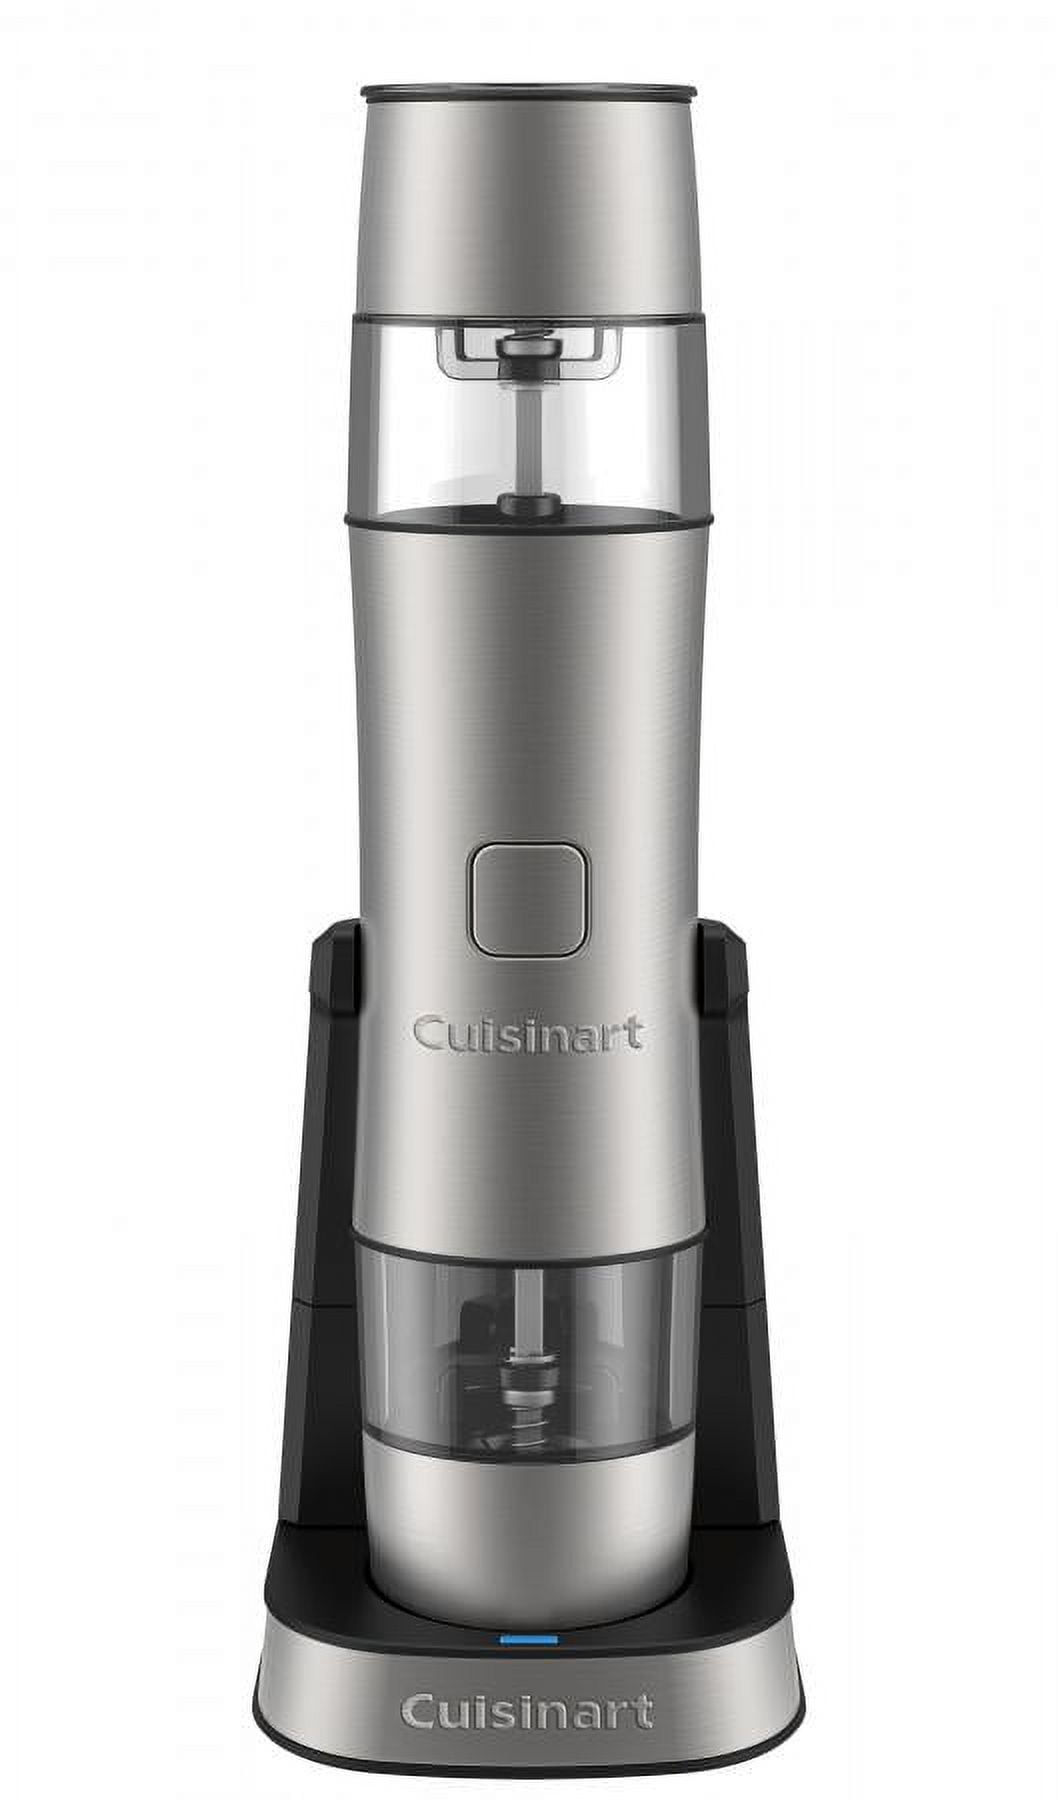 Cuisinart Specialty Appliances Rechargeable Salt, Pepper, and